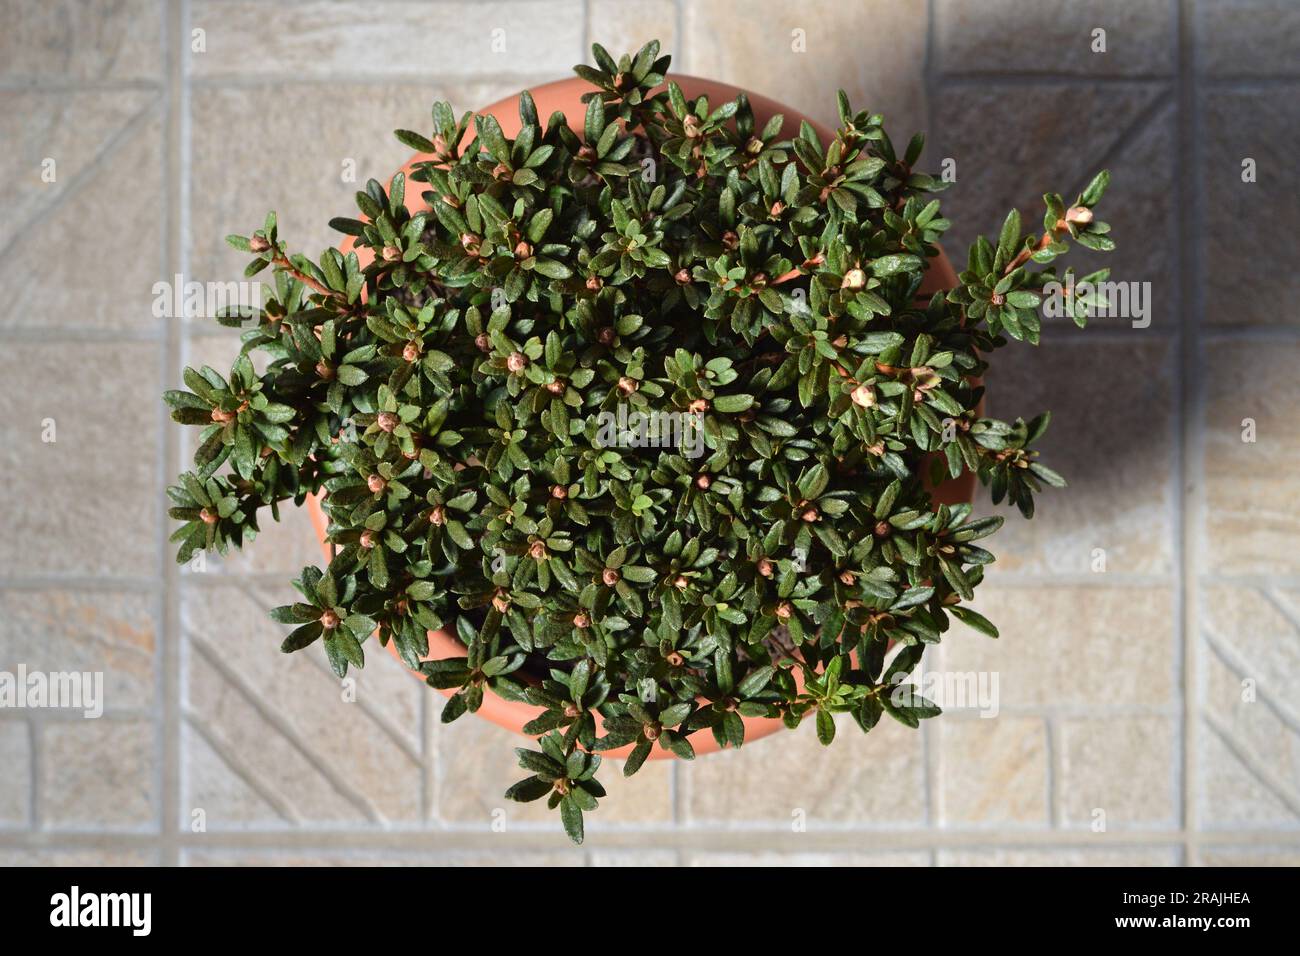 Top view of Chinese dwarf rhododendron in the flower pot Stock Photo